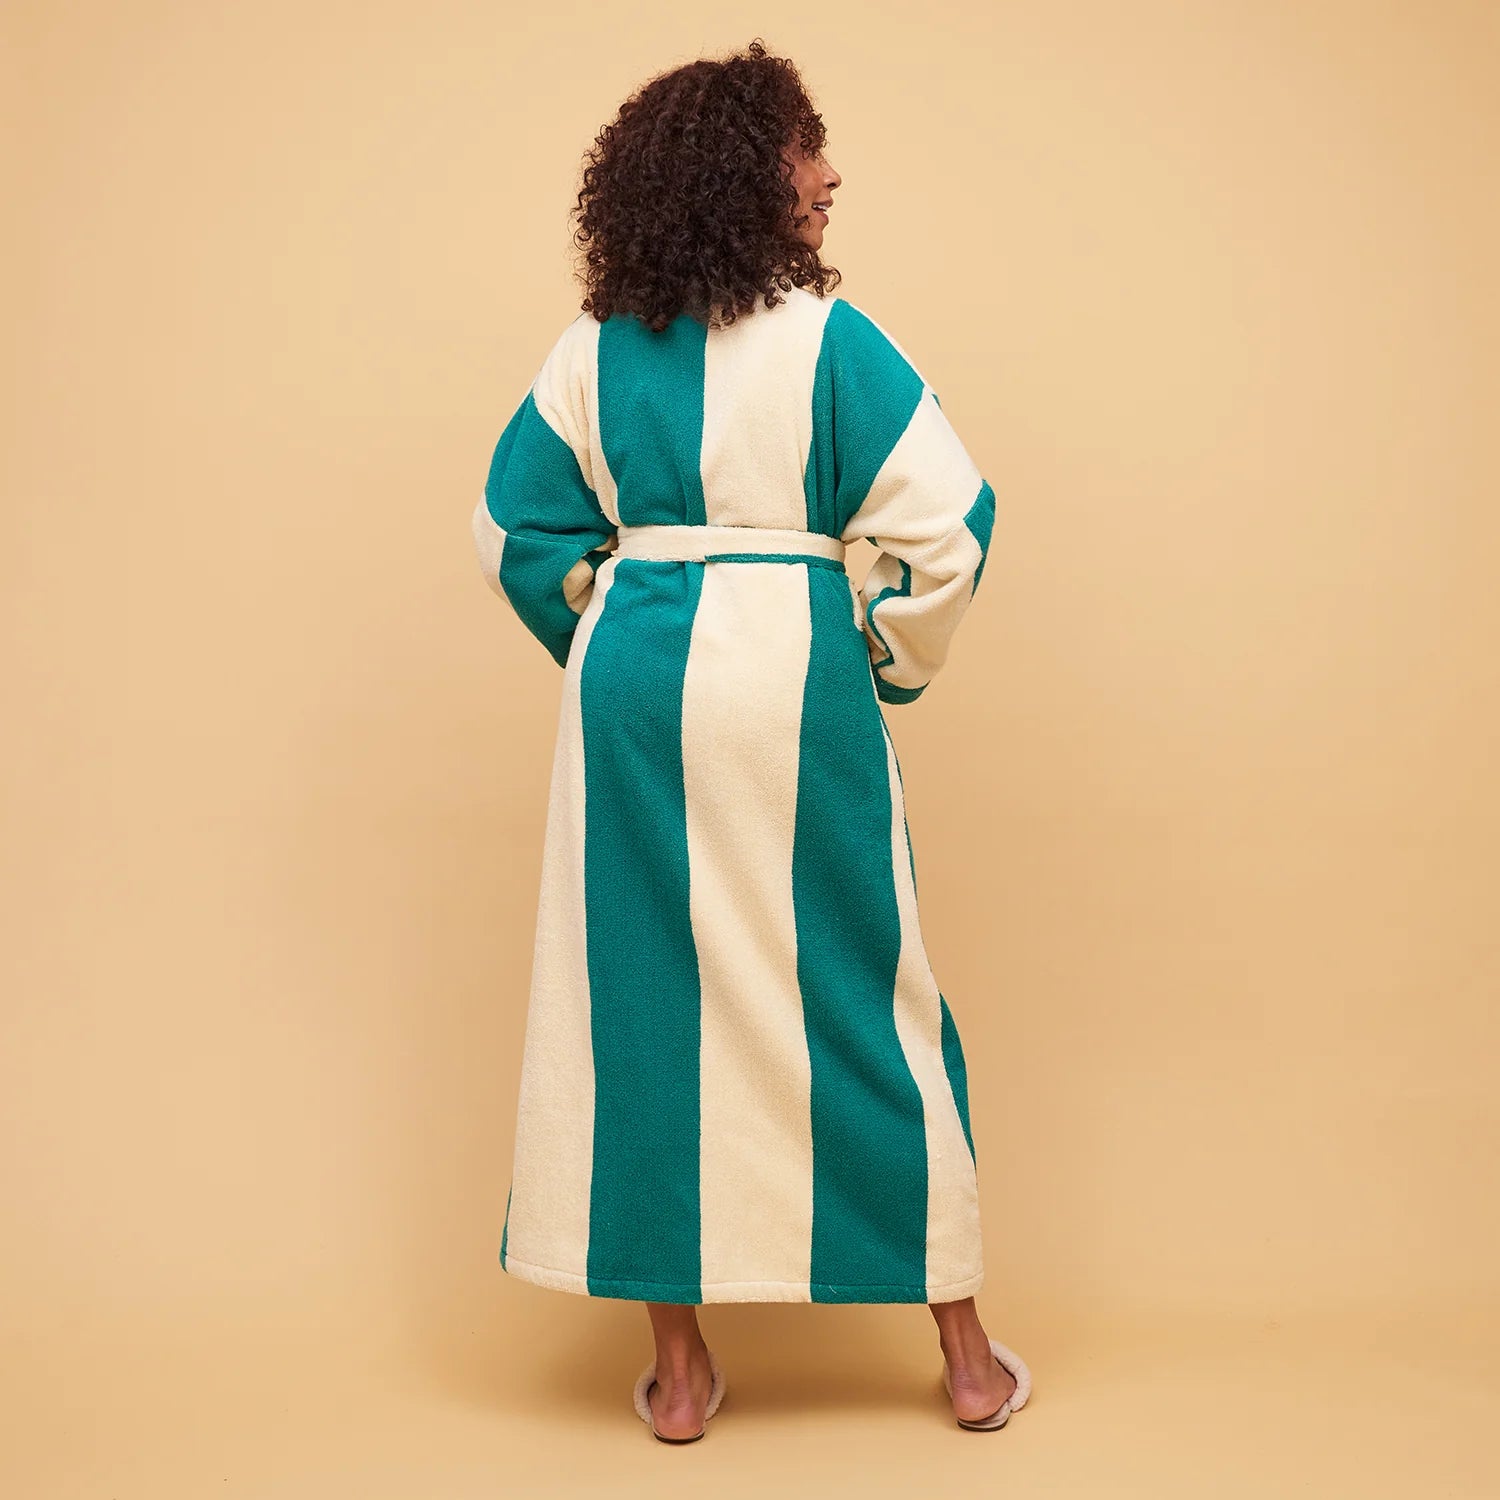 Halifax Towelling Robe - Teal by 